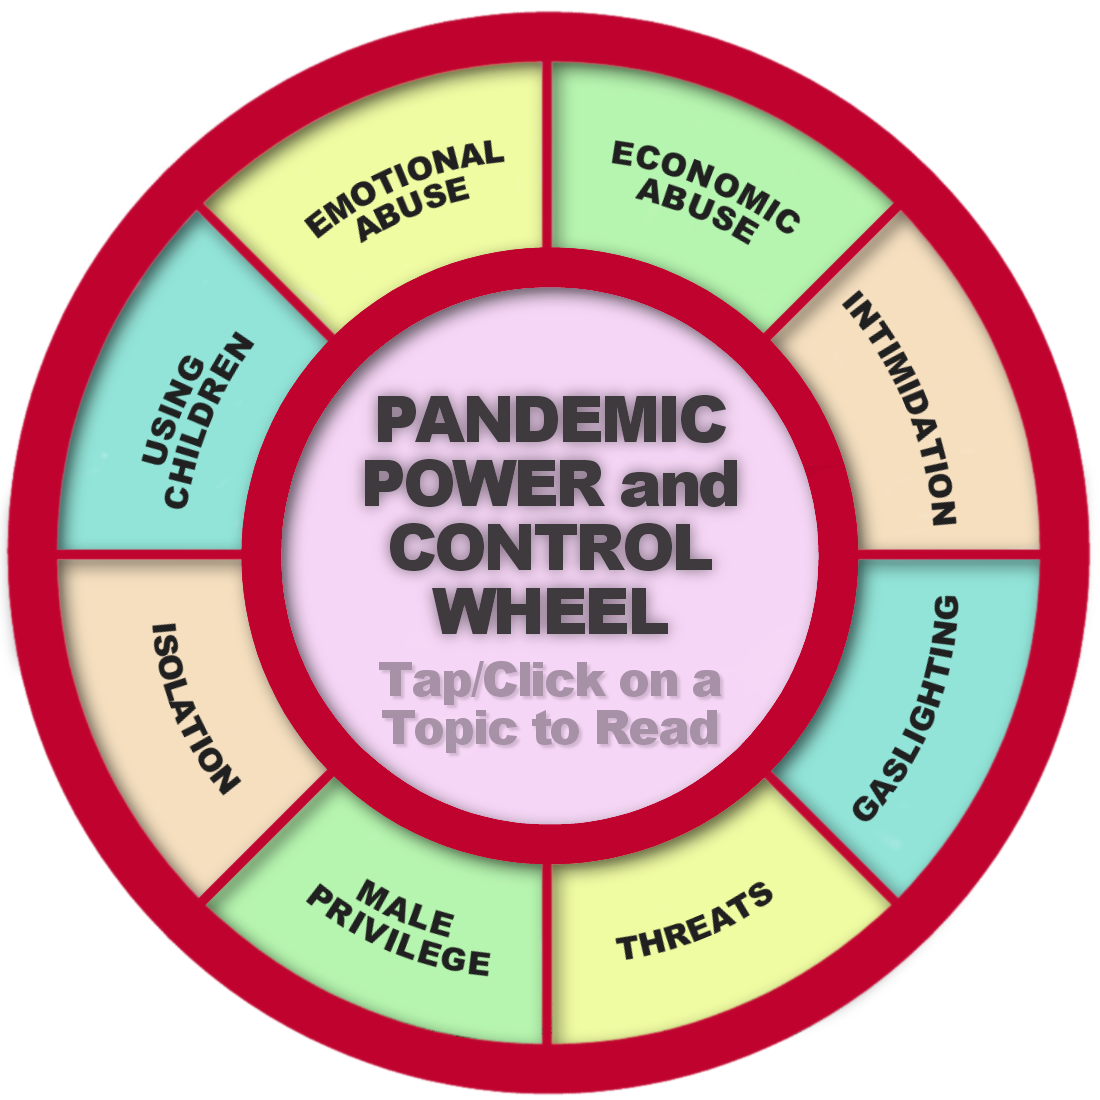 Pandemic Power and Control Wheel